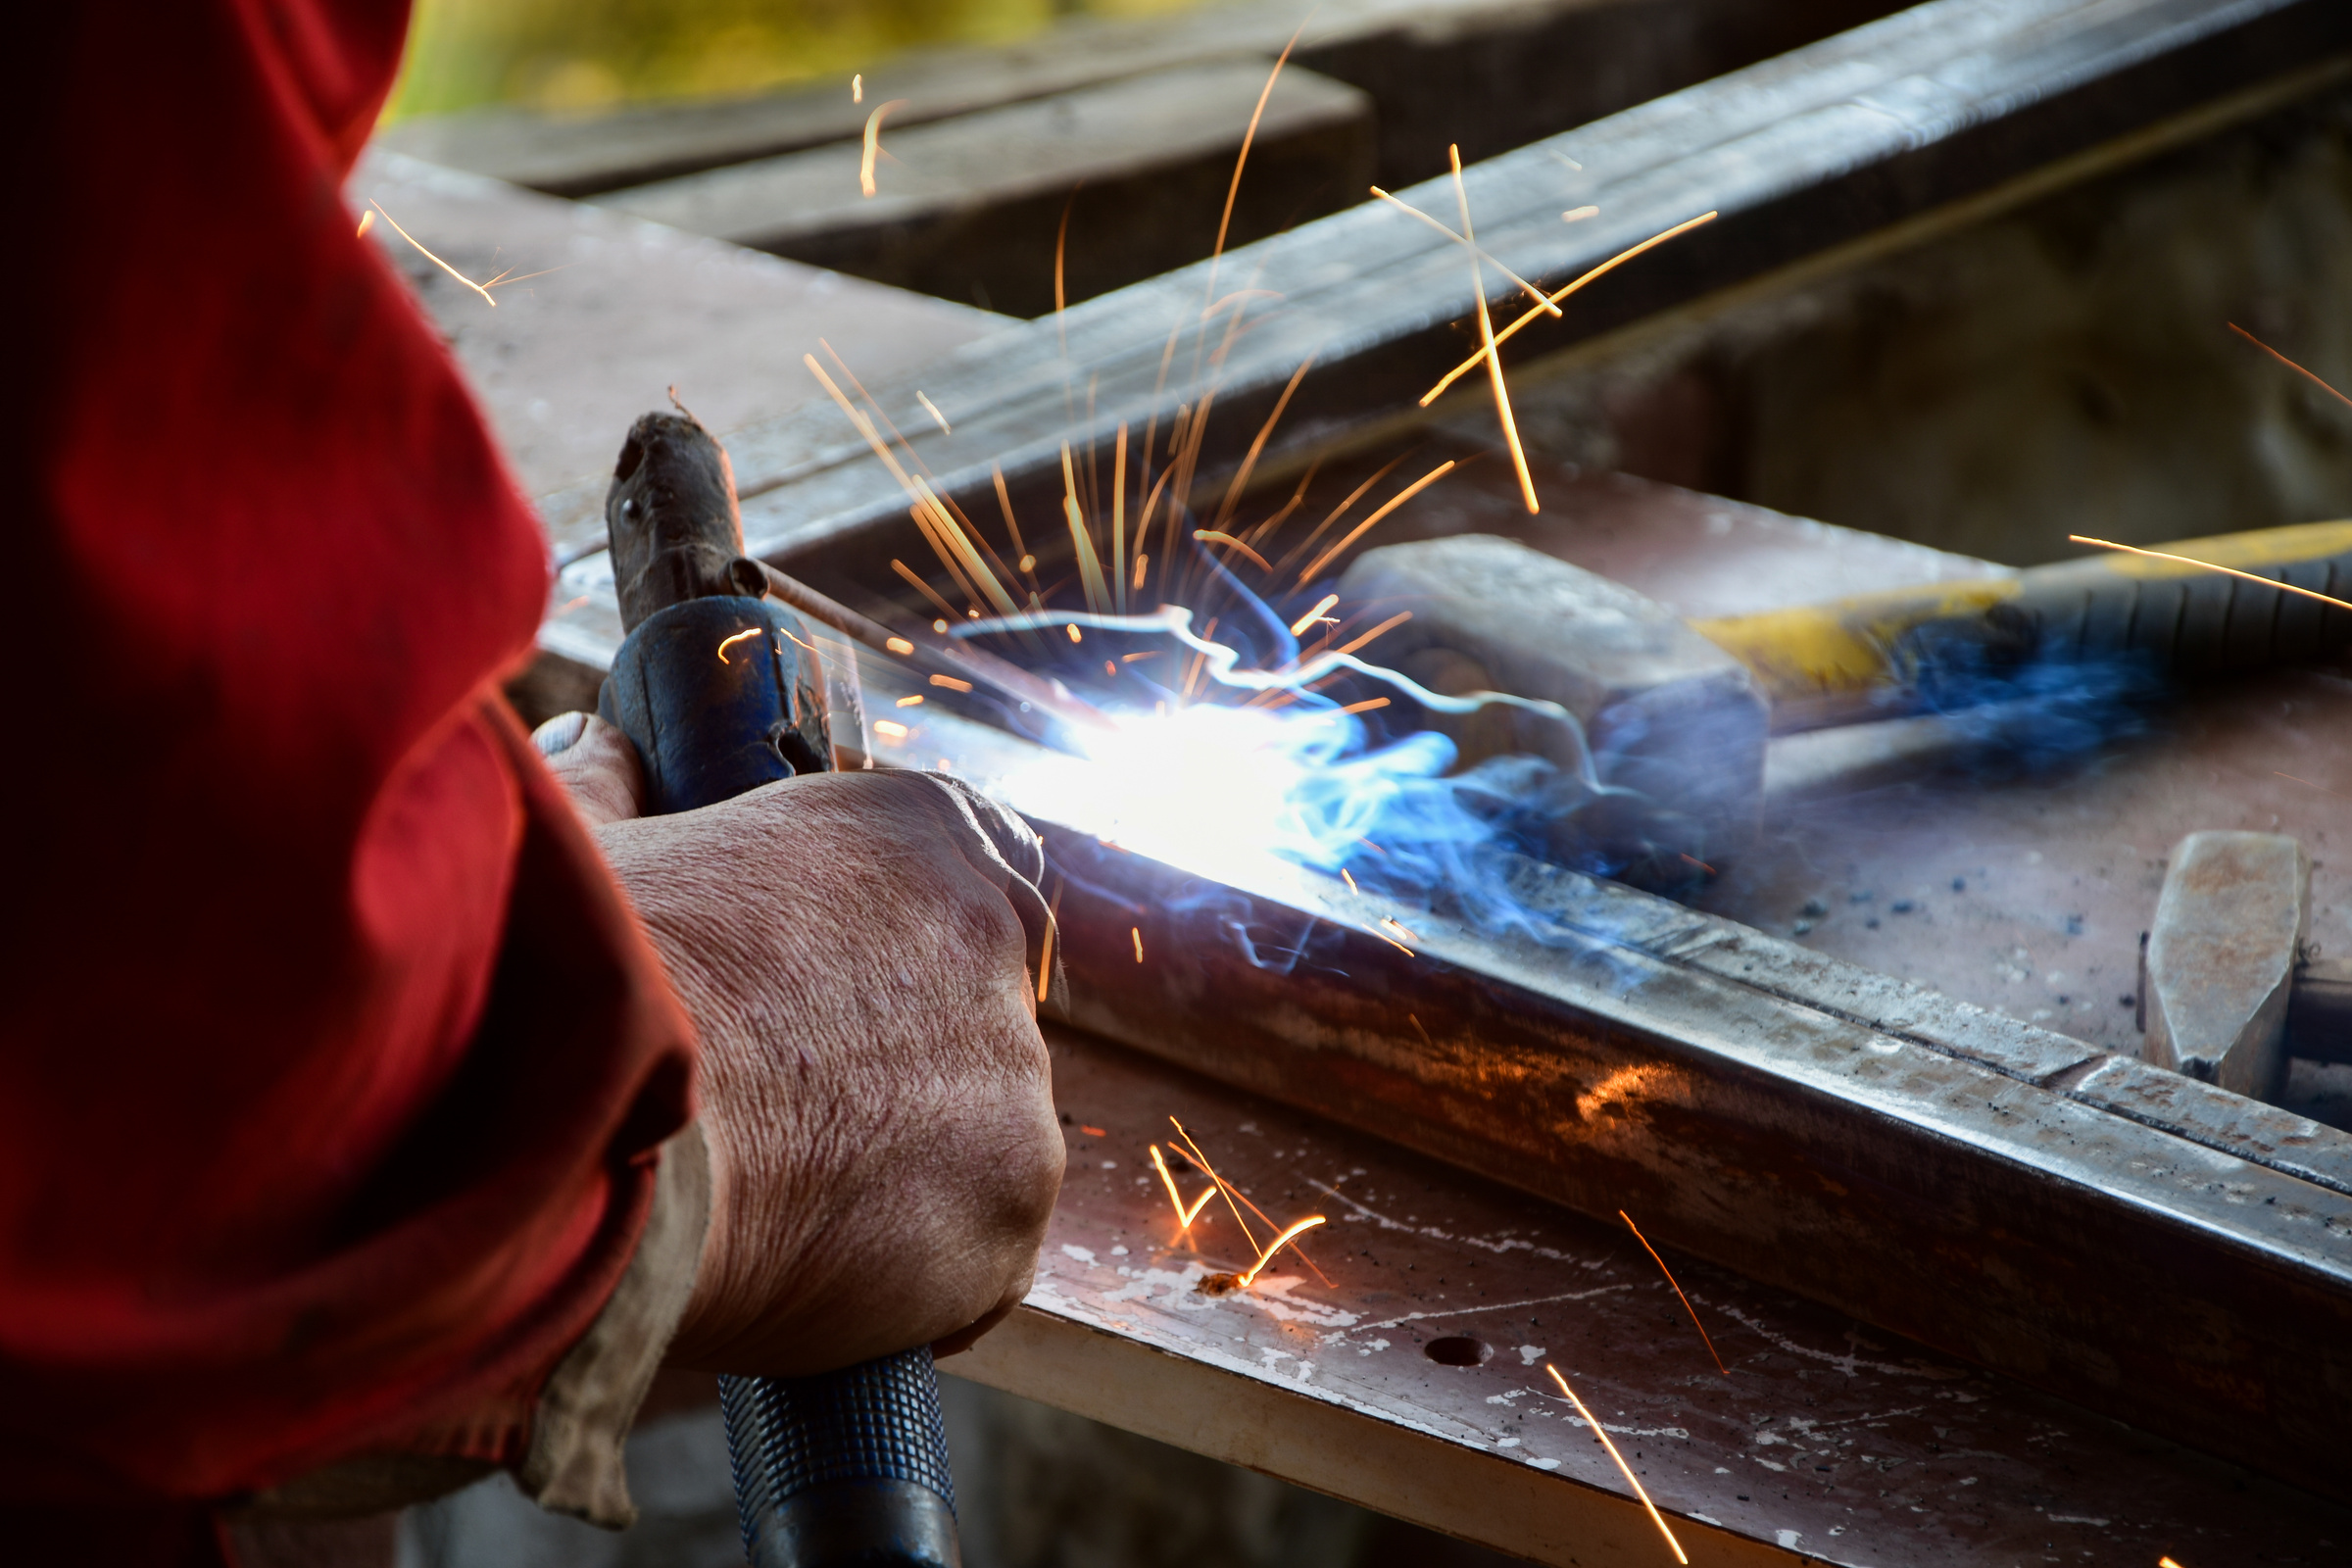 A man is shown welding square hollow section